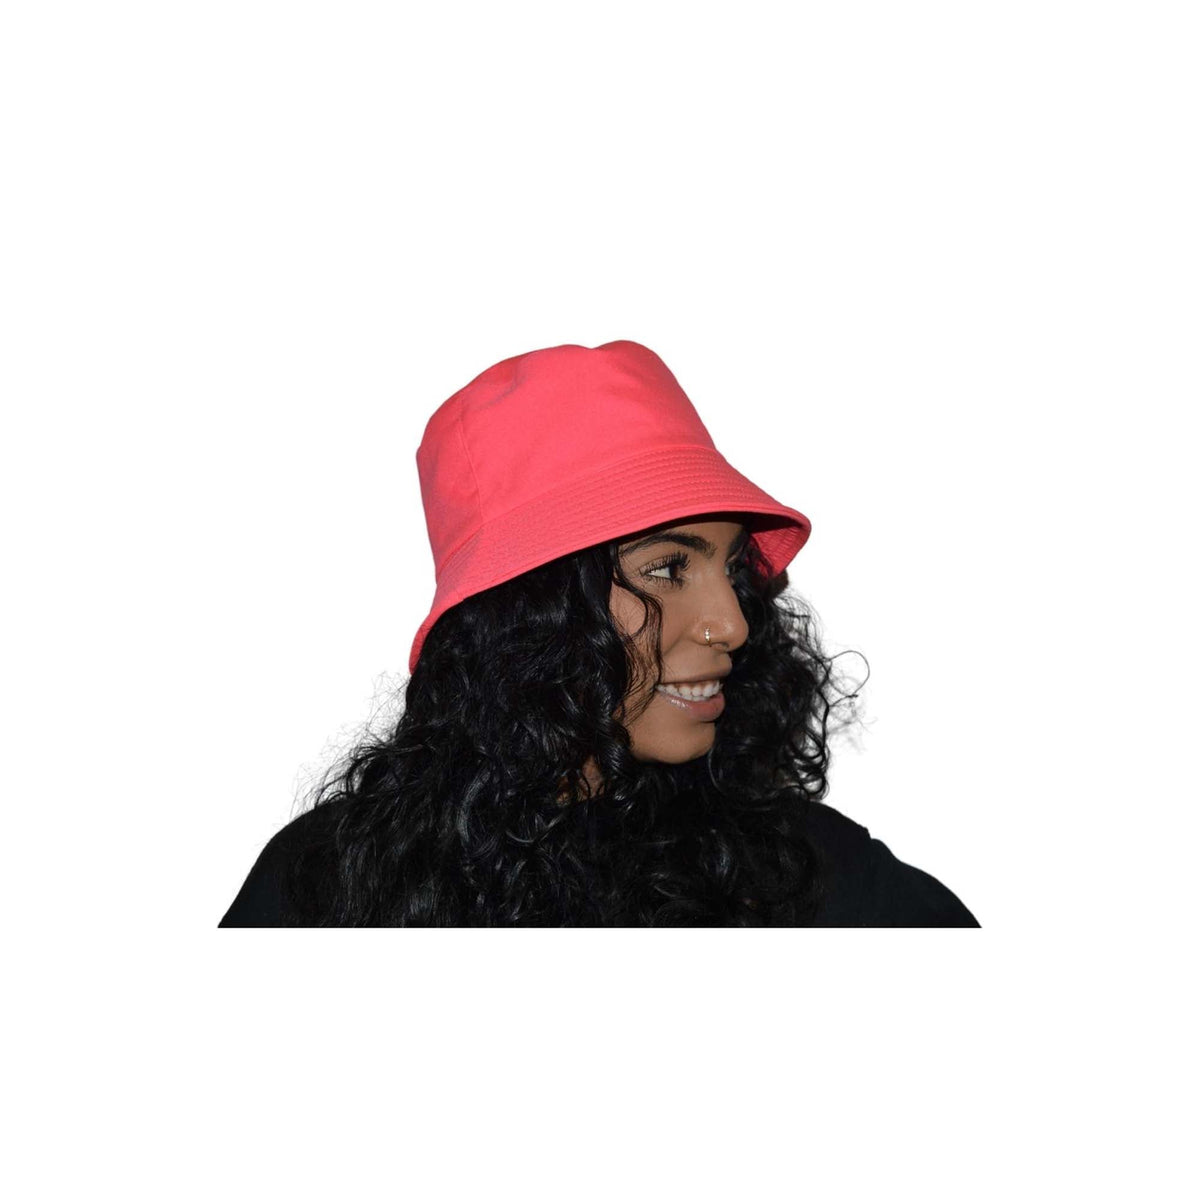 BUY4STORE Costume Accessories Pink Color Blast Gilligan Hat for Adults, 1 Count